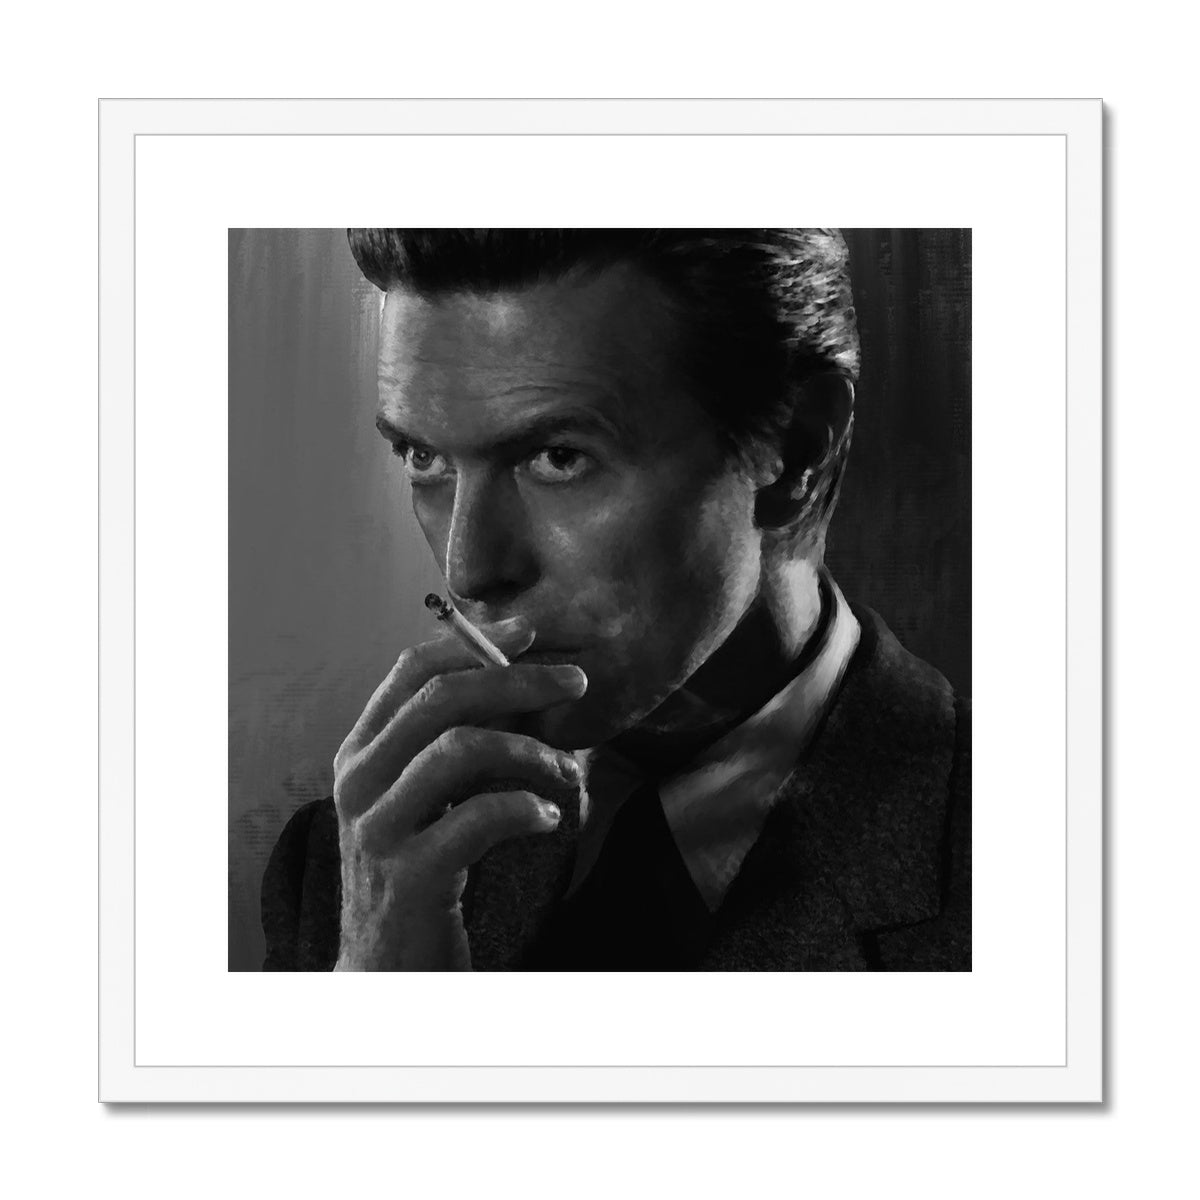 DAVID BOWIE #1 Framed & Mounted Print